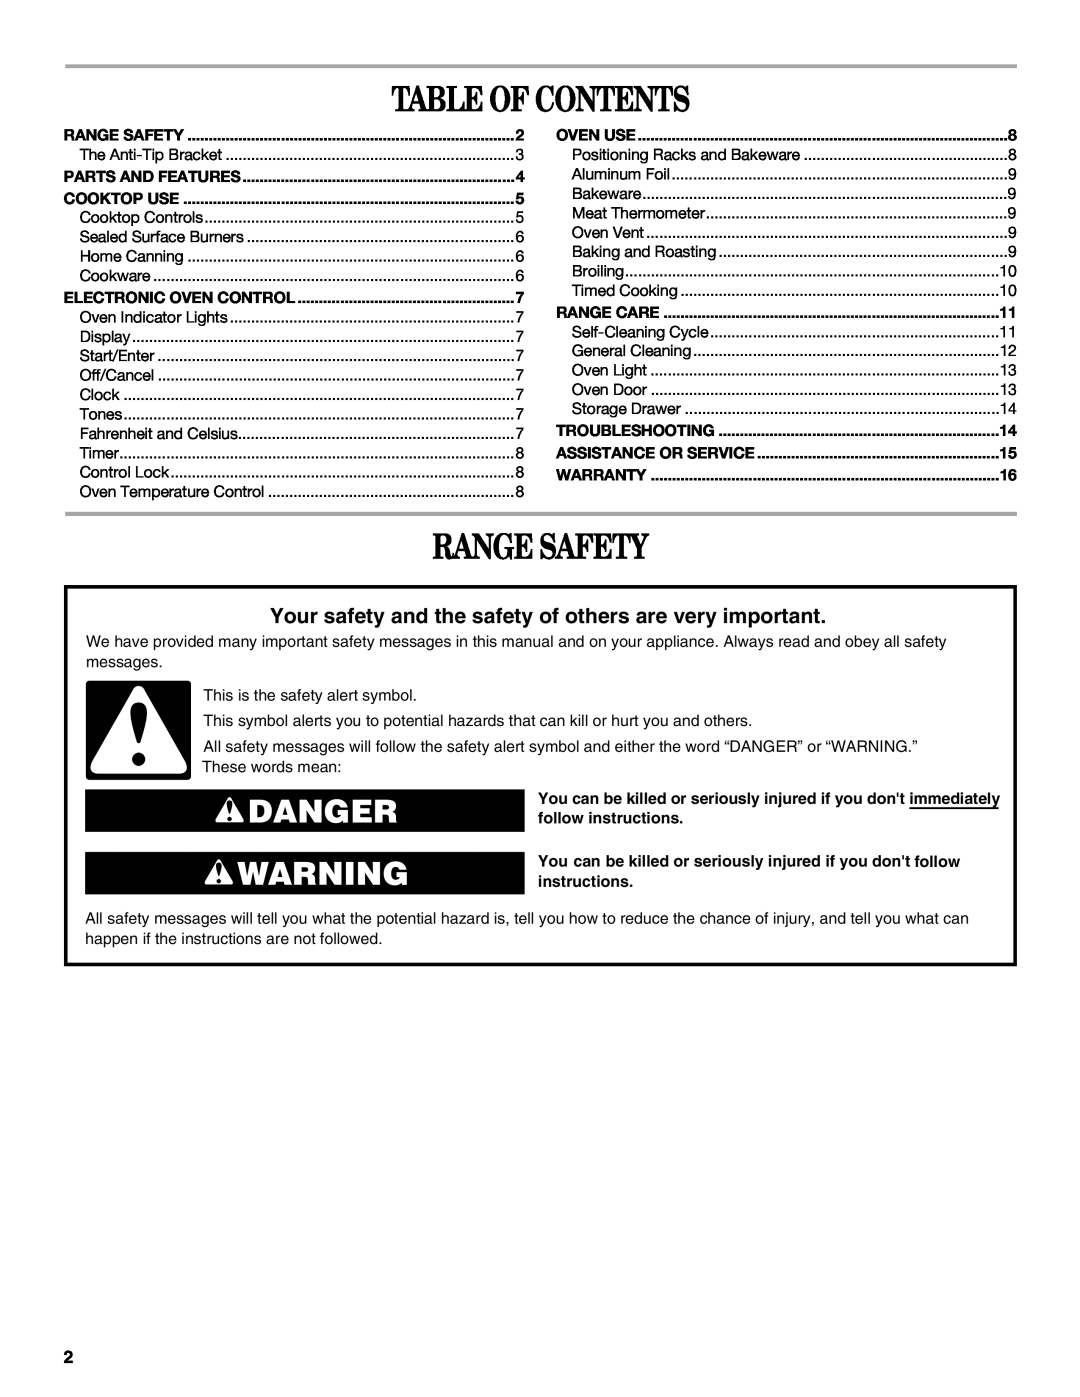 Whirlpool IGS325RQ2 manual Table Of Contents, Range Safety, Danger 